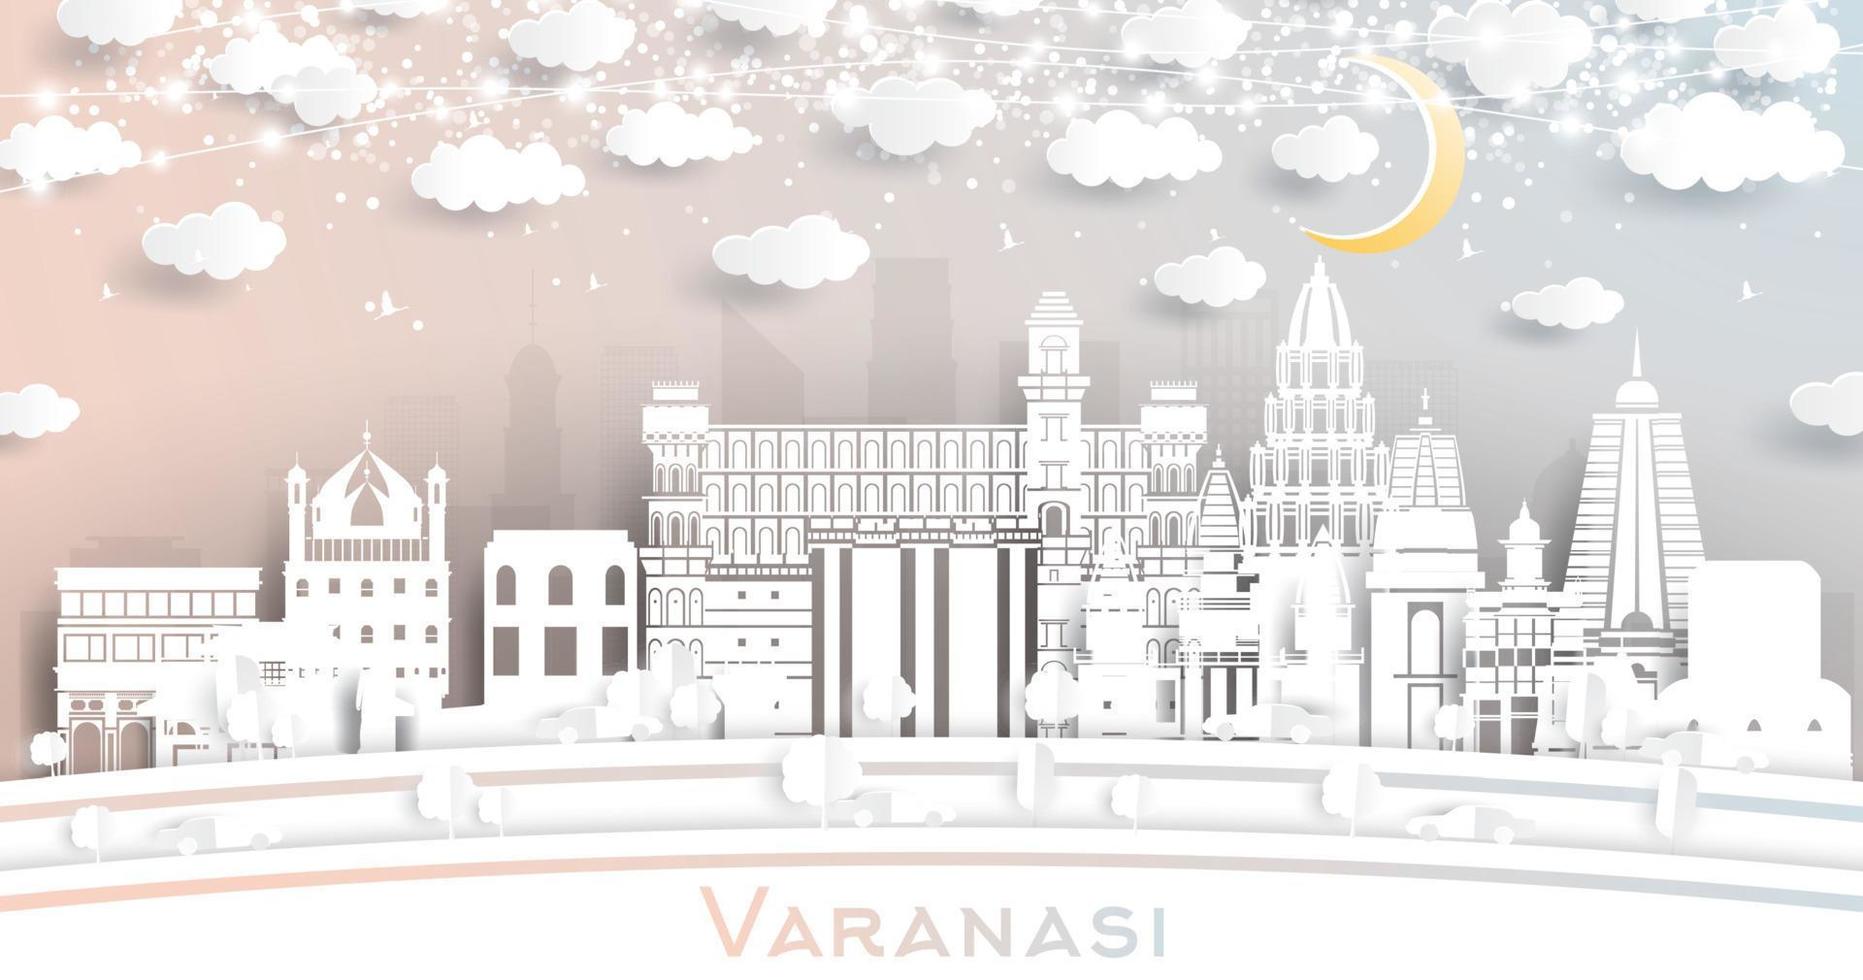 Varanasi India City Skyline in Paper Cut Style with White Buildings, Moon and Neon Garland. vector